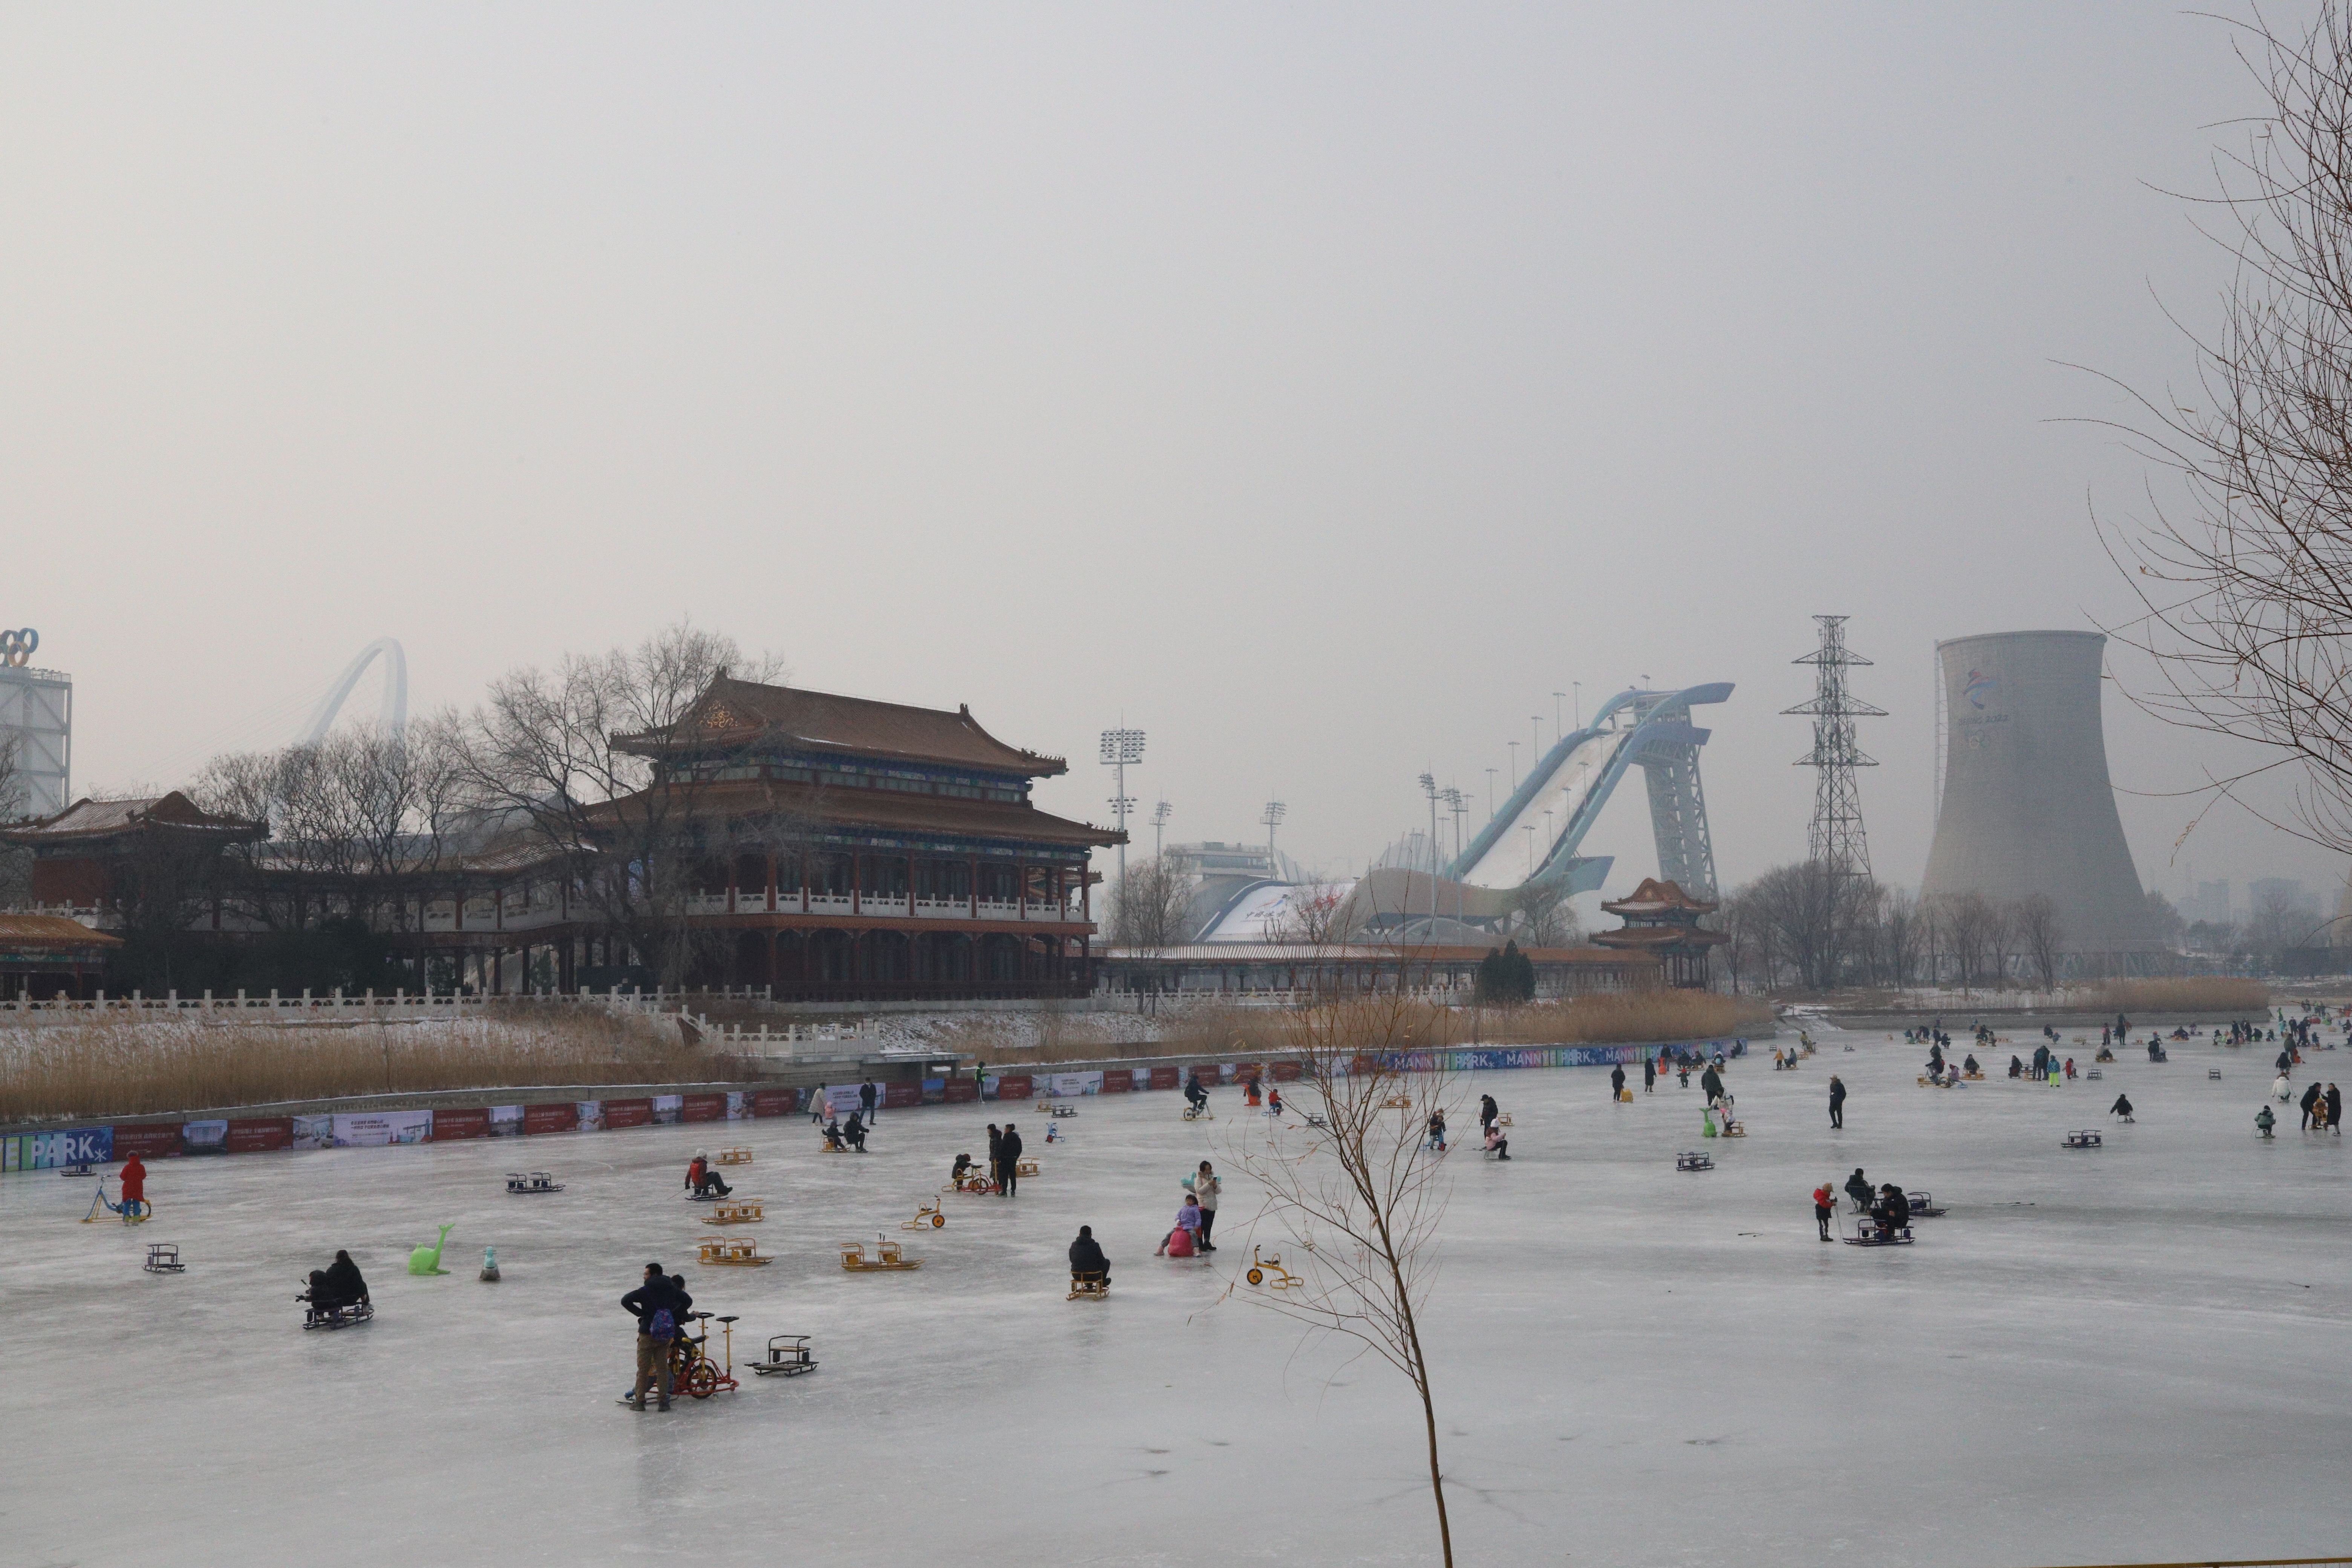 A view across the frozen lake in Shougang. In the background you can see the iconic Big Air venue from the winter Olympics.